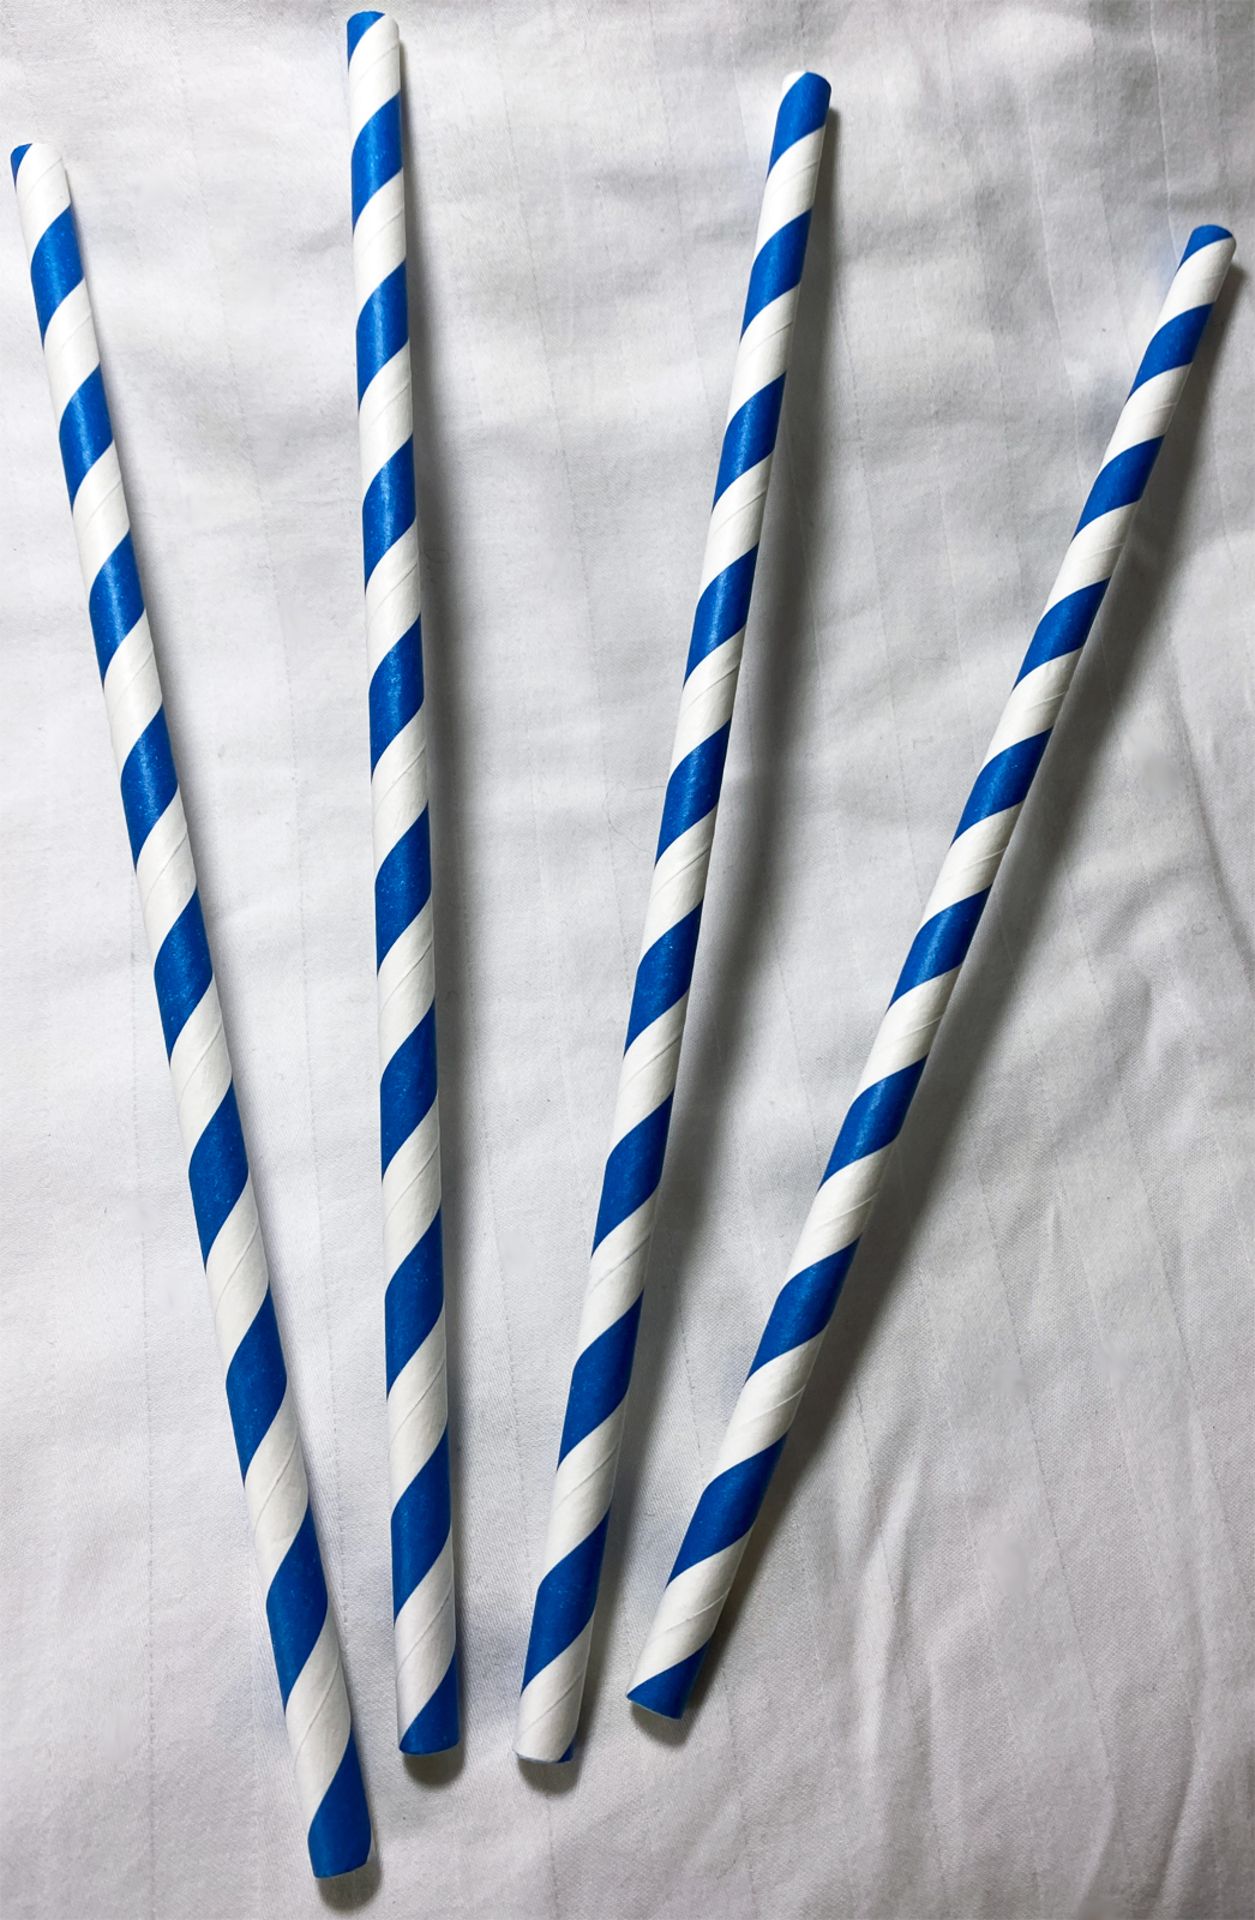 2 x Boxes of Candy Twist Paper Straws by 888 Gastro Disposables | DSP48 - Image 3 of 5